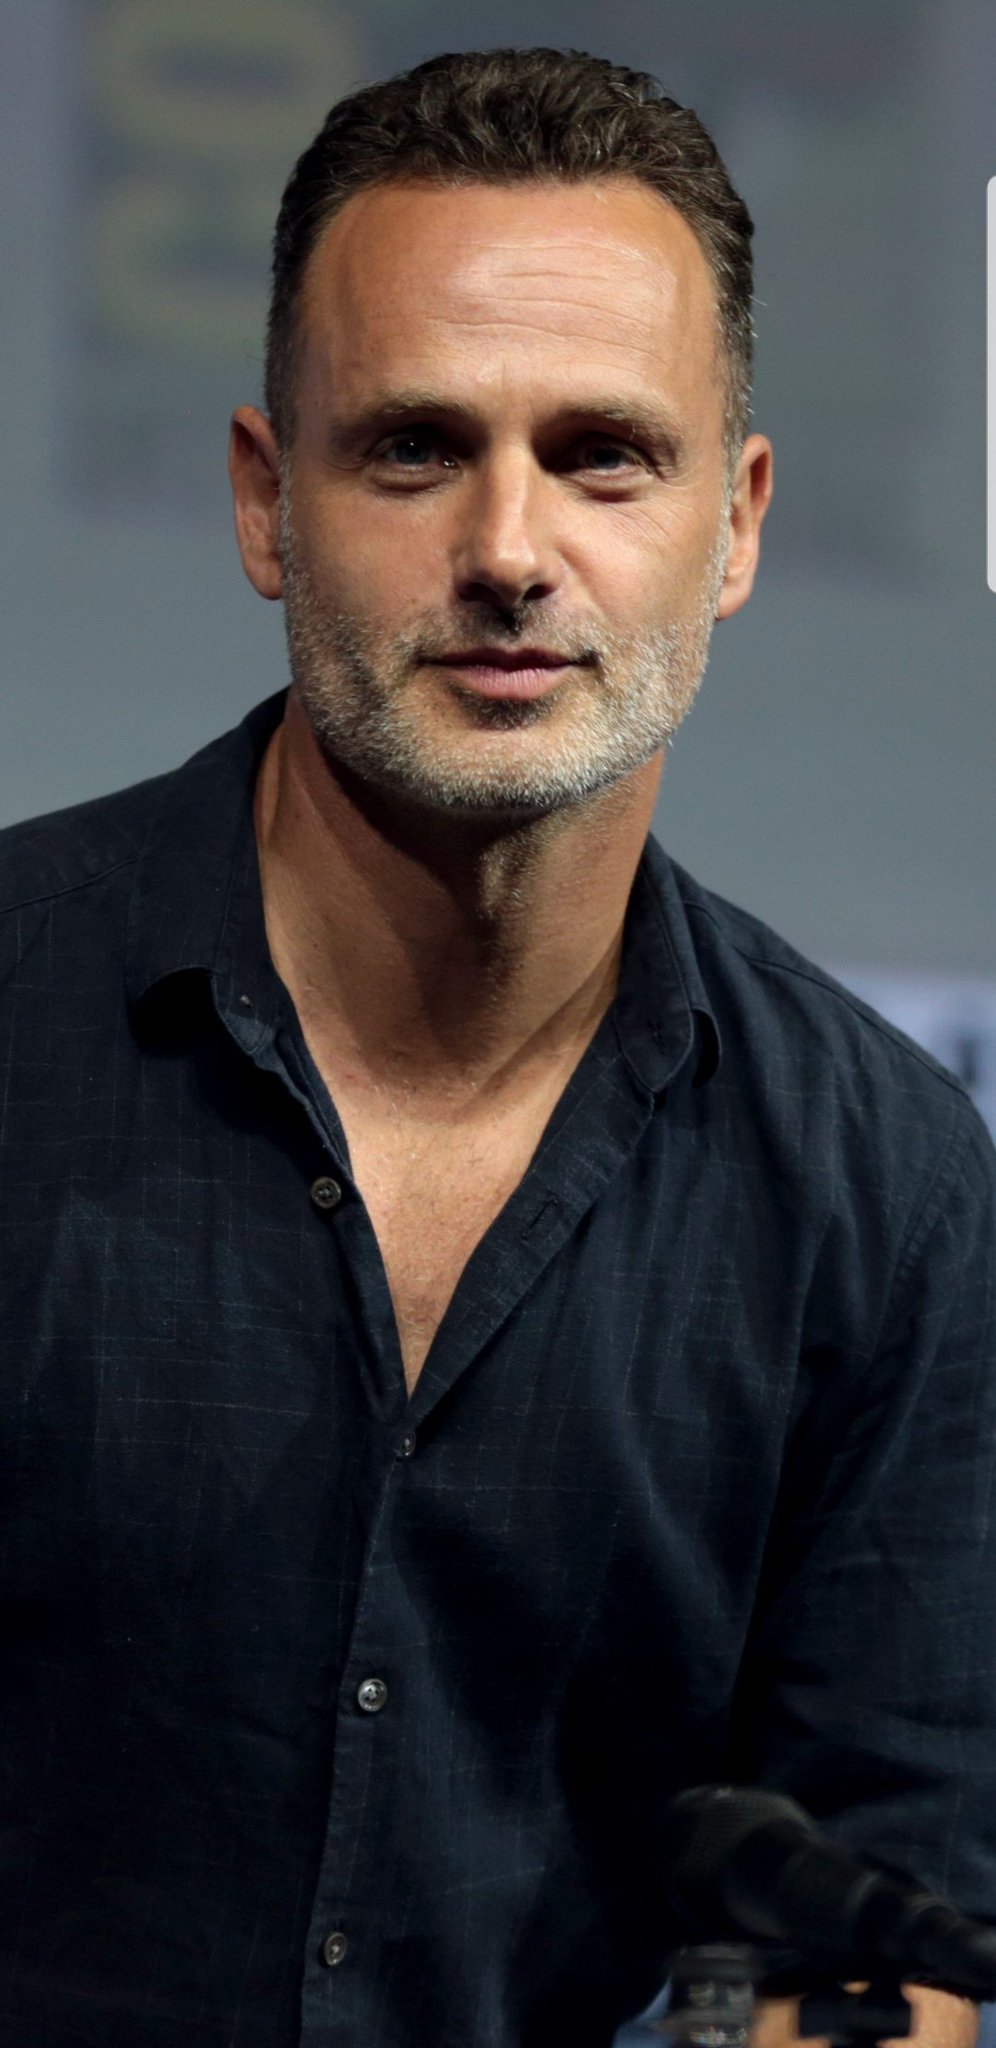   DOES ANDREW LINCOLN RUN THIS MUTHAFUCKA!?   HELL YEAH!  Happy Birthday!!  